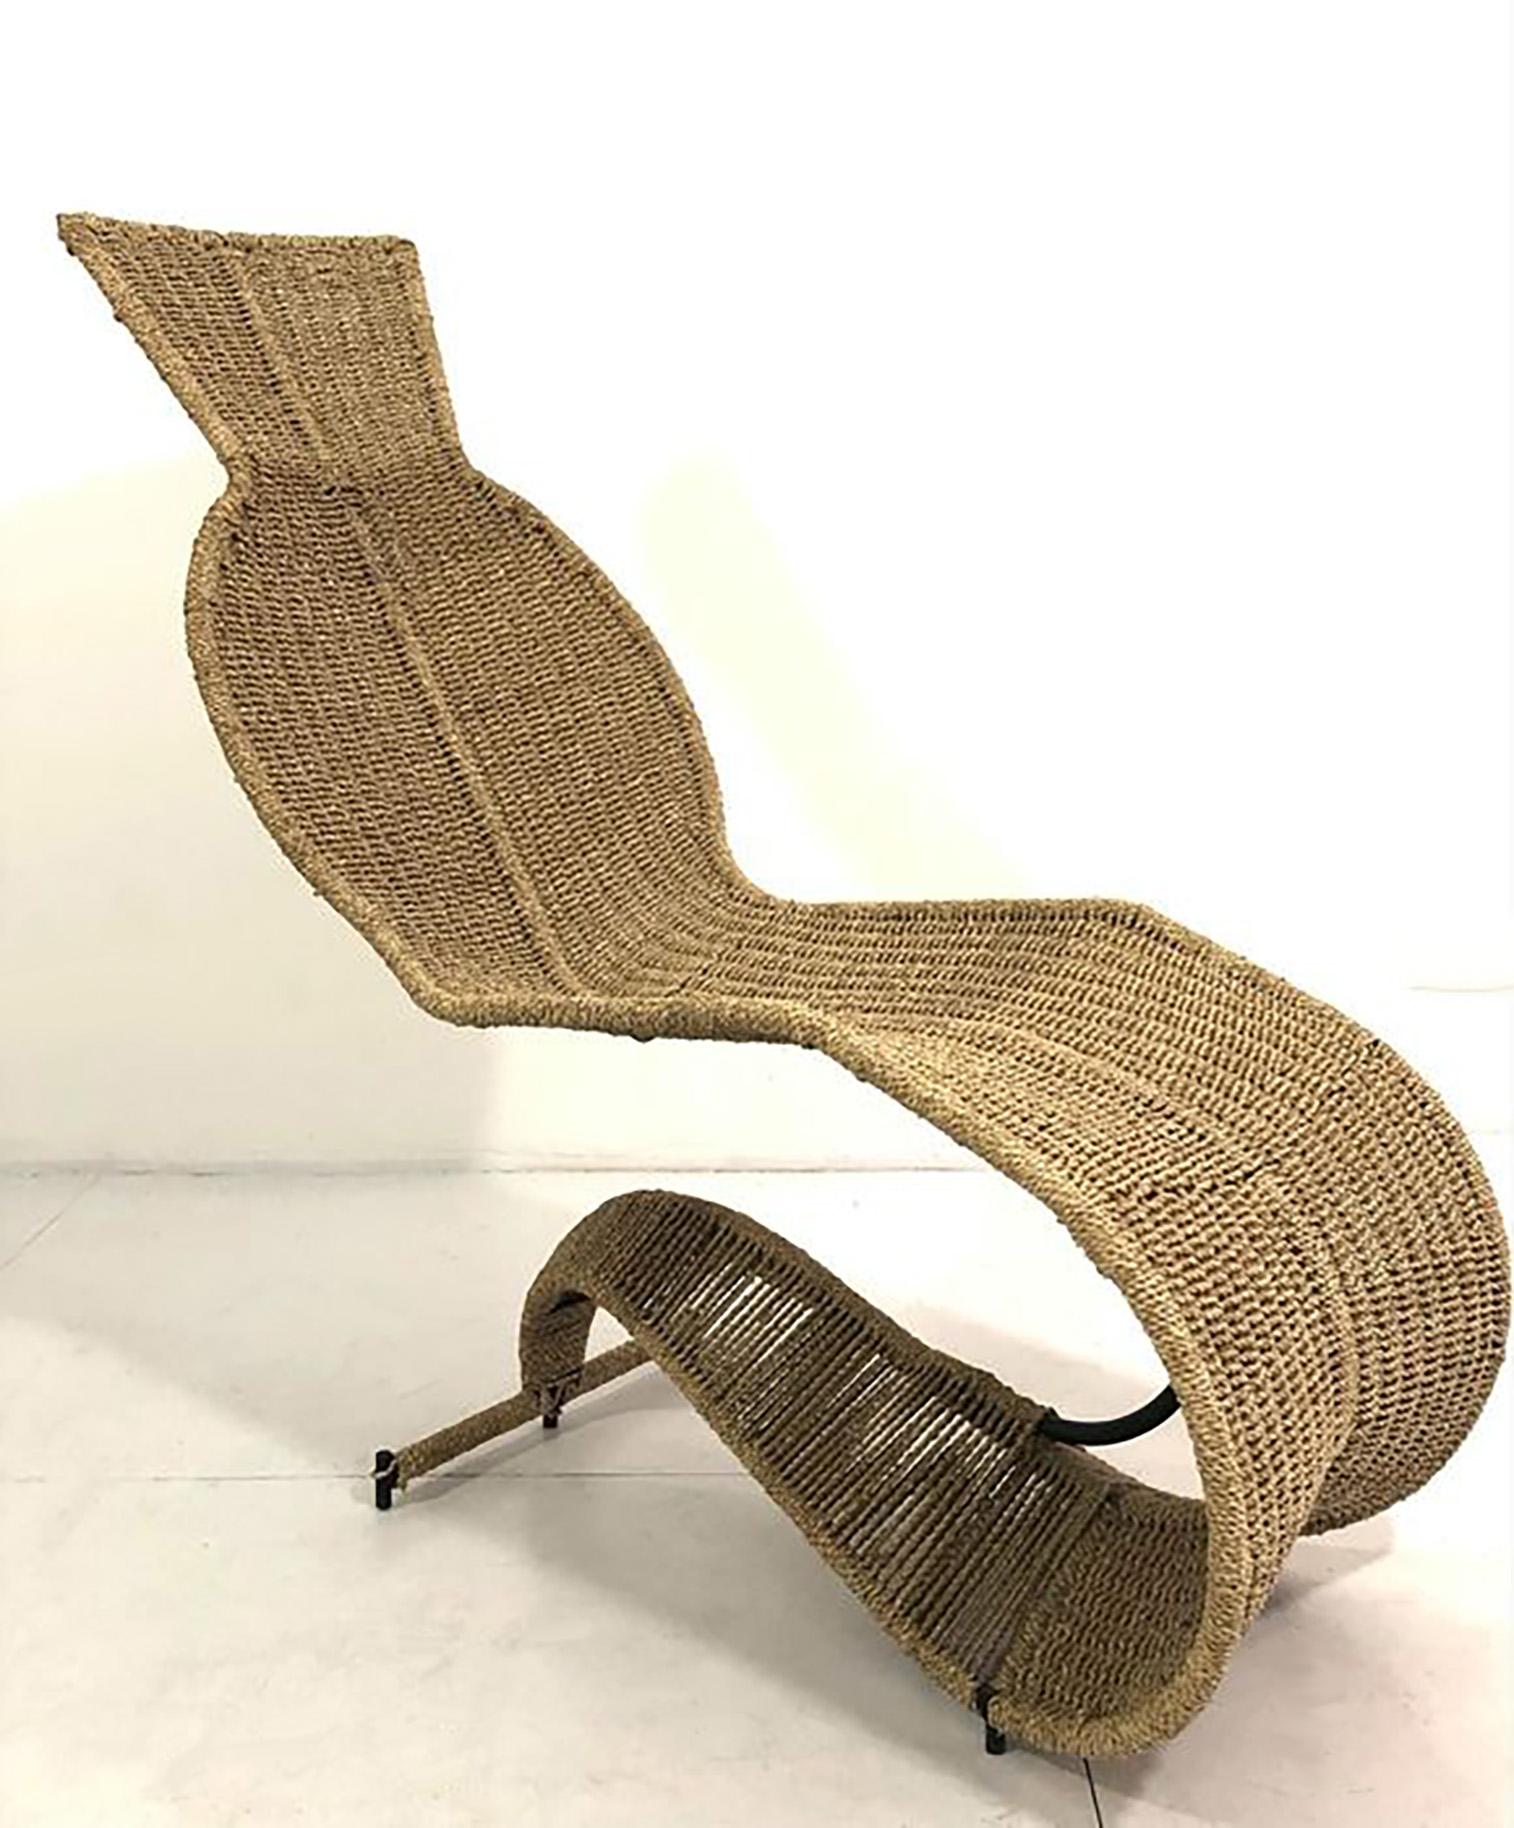 Tom Dixon.
Bolide chair.
lounge chair.
Metal and braided rope.
Circa 1988.
121 x D 55 x 122 cms.
Rare edition.
Excellent condition.